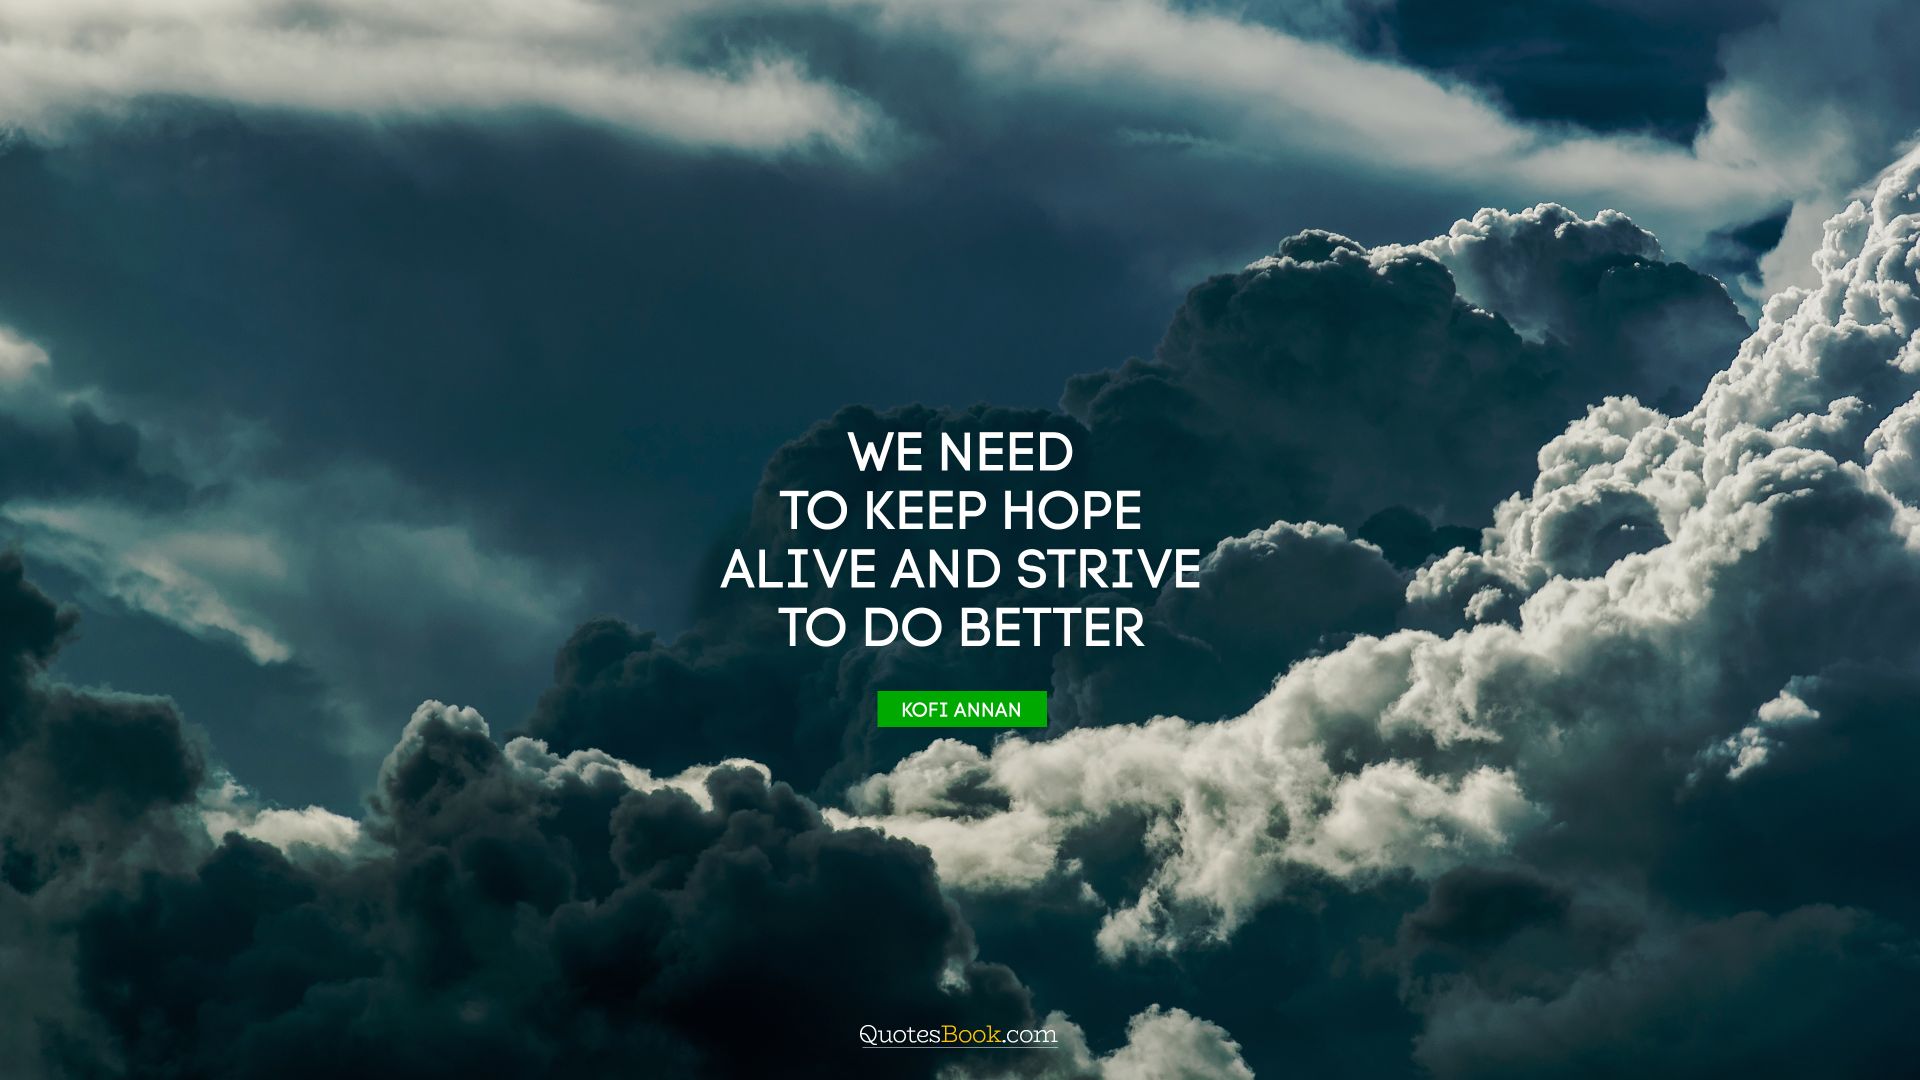 We need to keep hope alive and strive to do better. - Quote by Kofi Annan